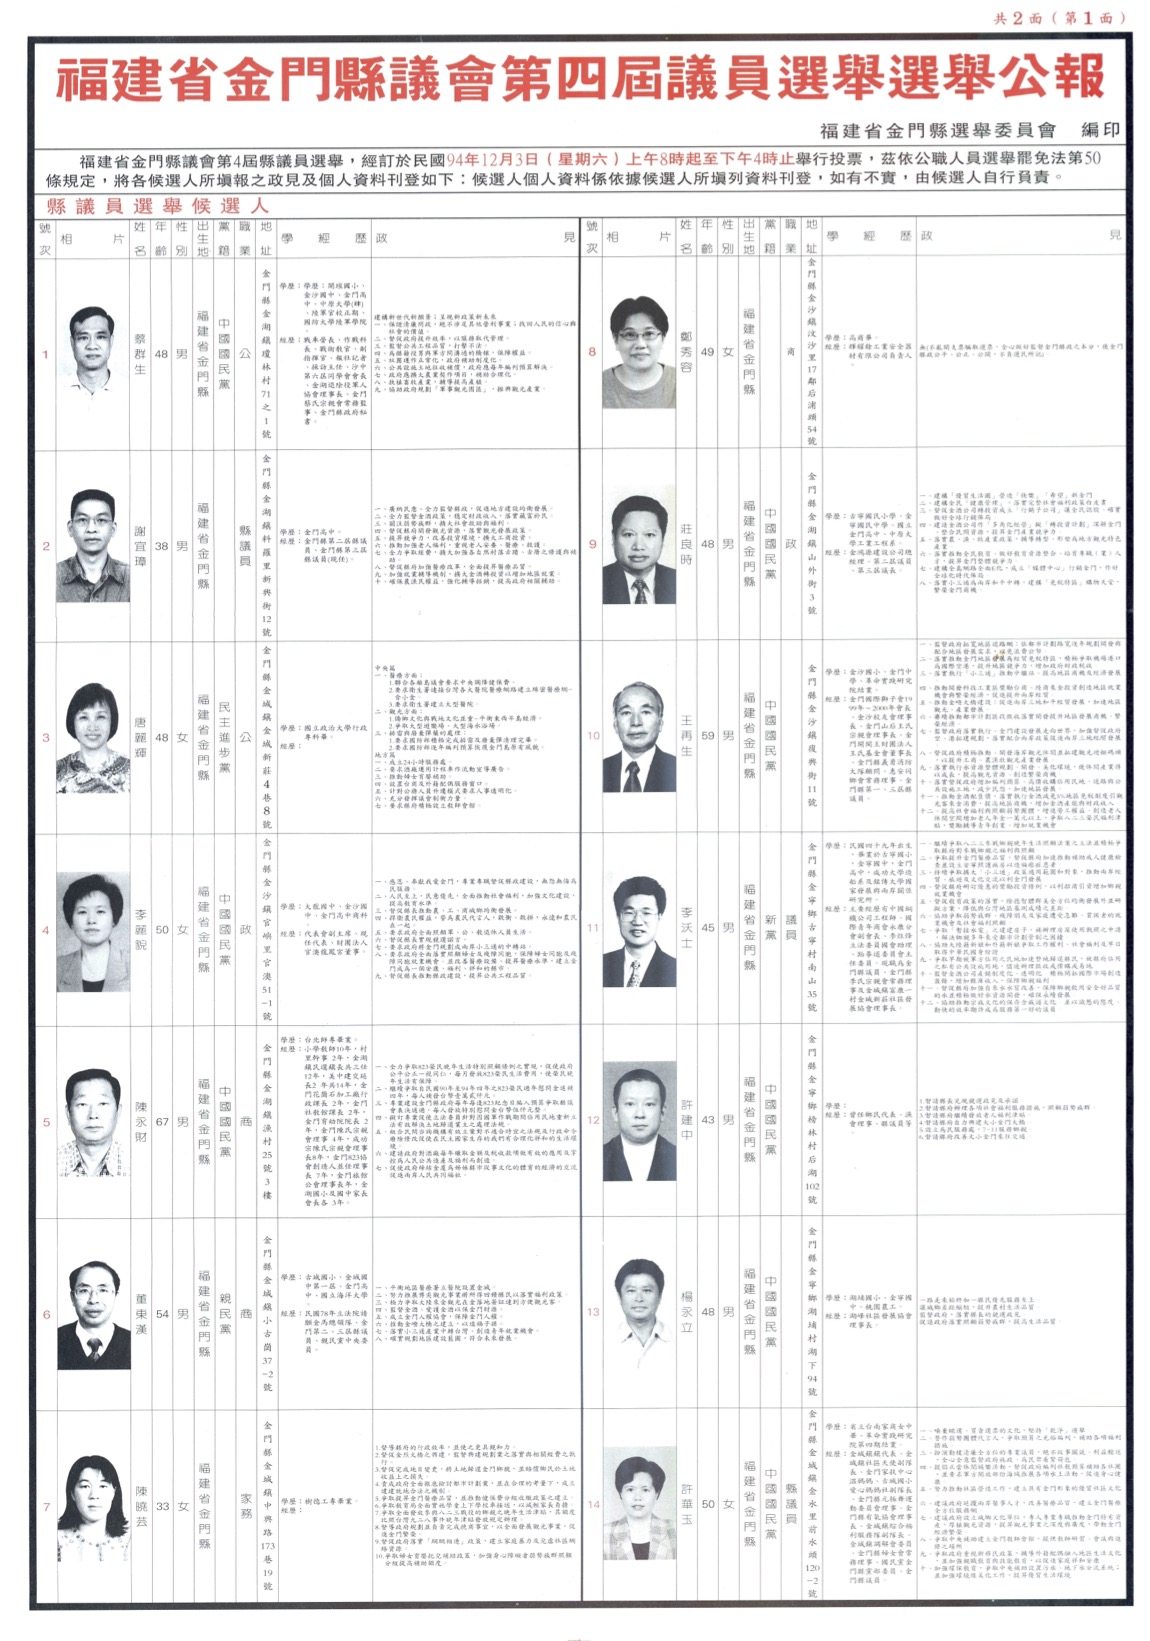 December 2005, the bulletin of the fourth Kinmen County Council Member election.